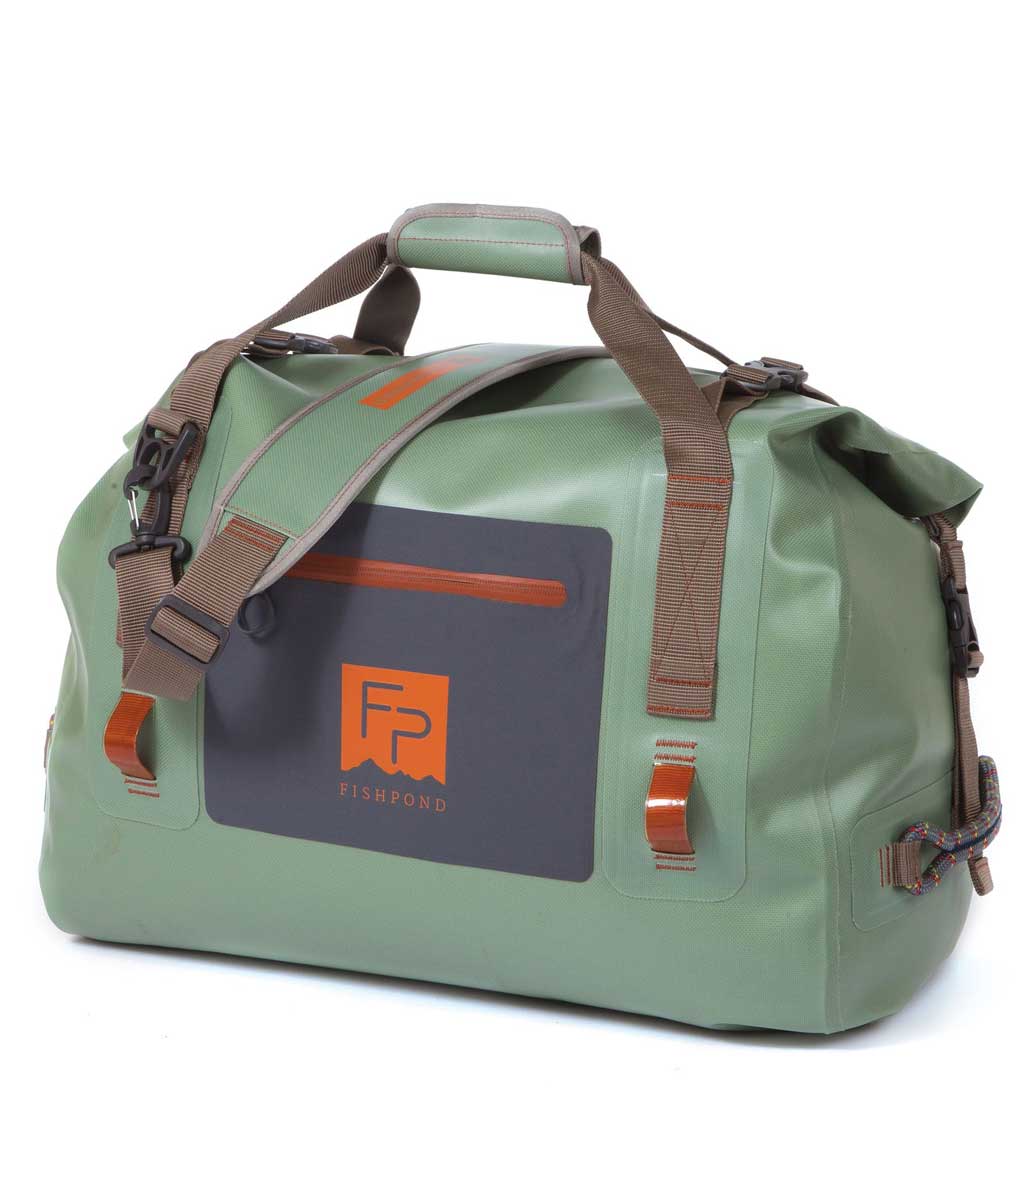 Fishpond Thunderhead Roll Top Duffel - Yucca - Click Image to Close